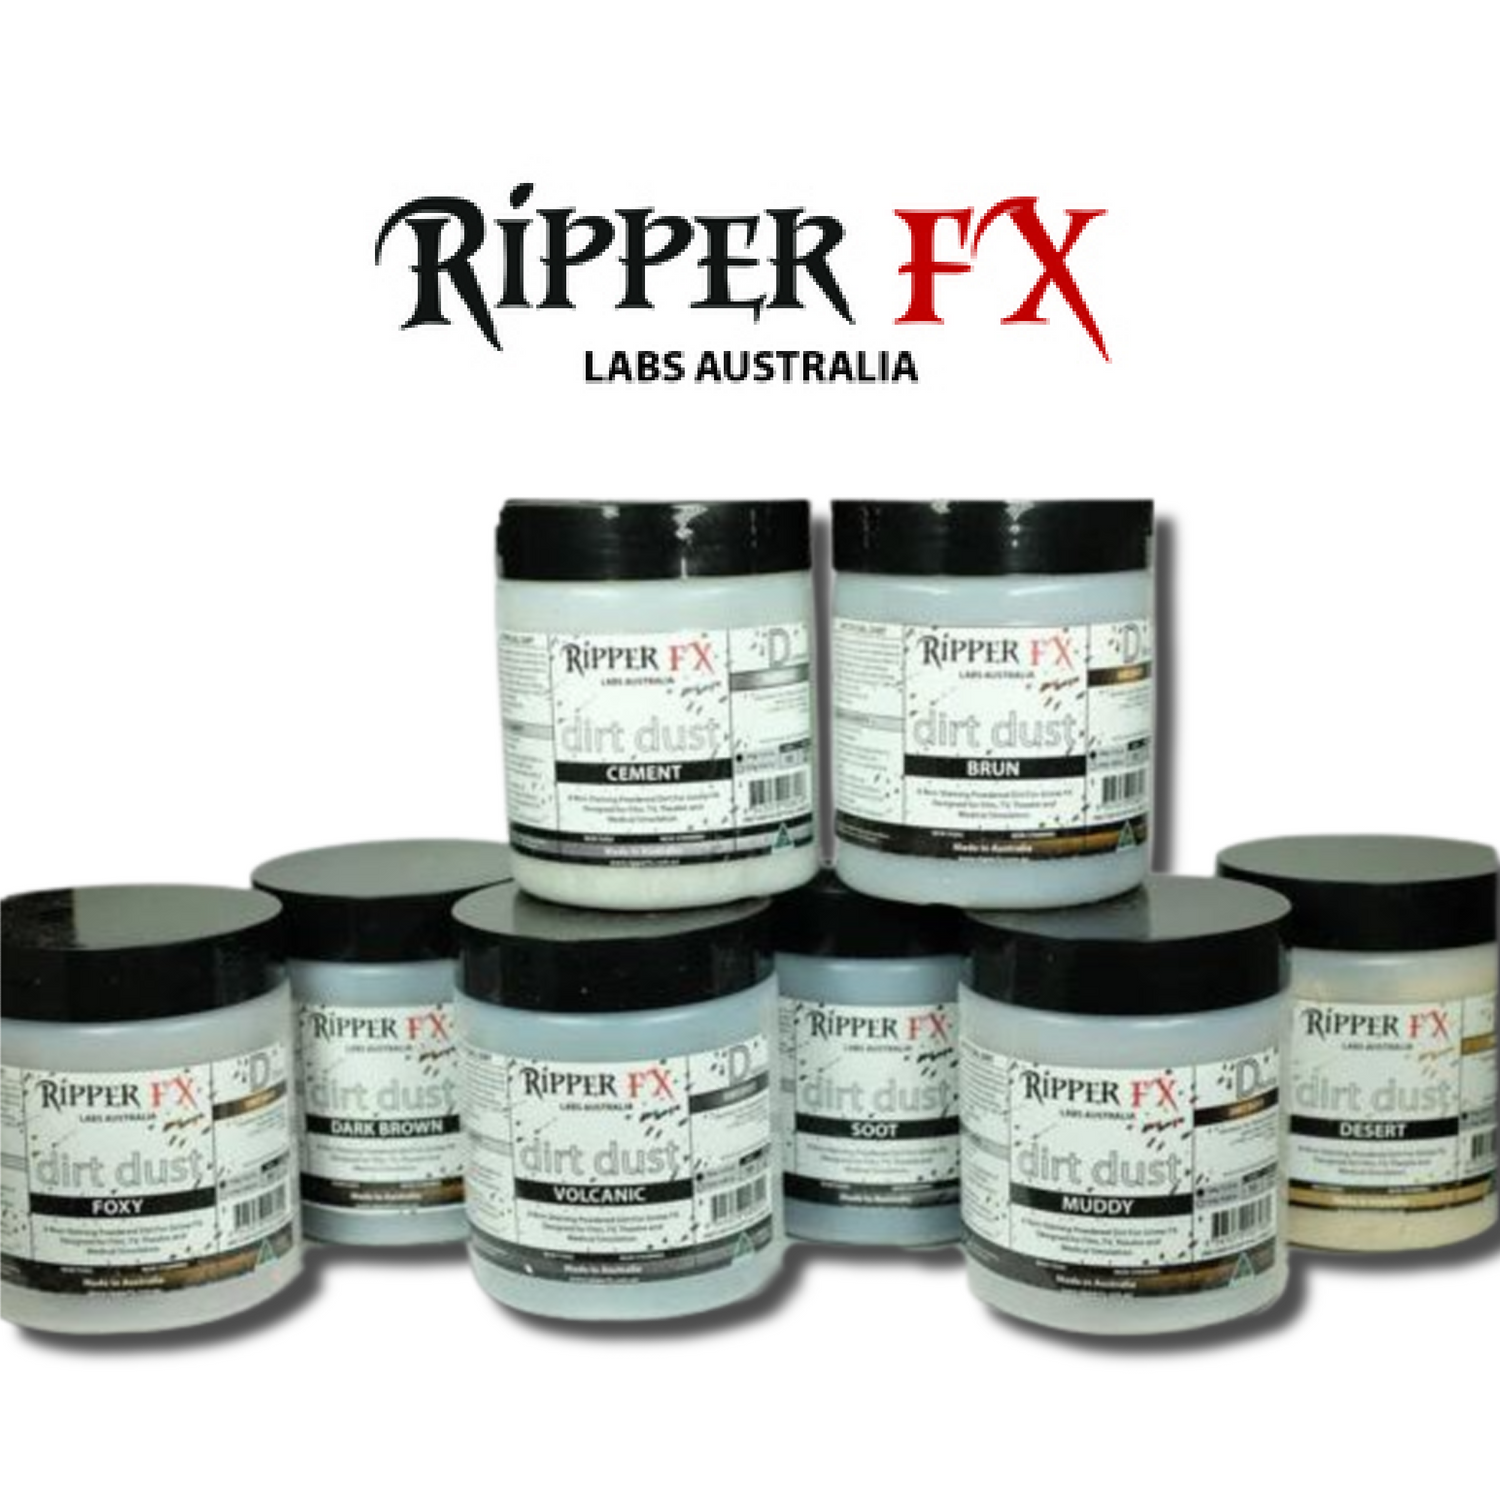 Ripper FX - Dirt Dust Powder (100g) - 8 Colours available